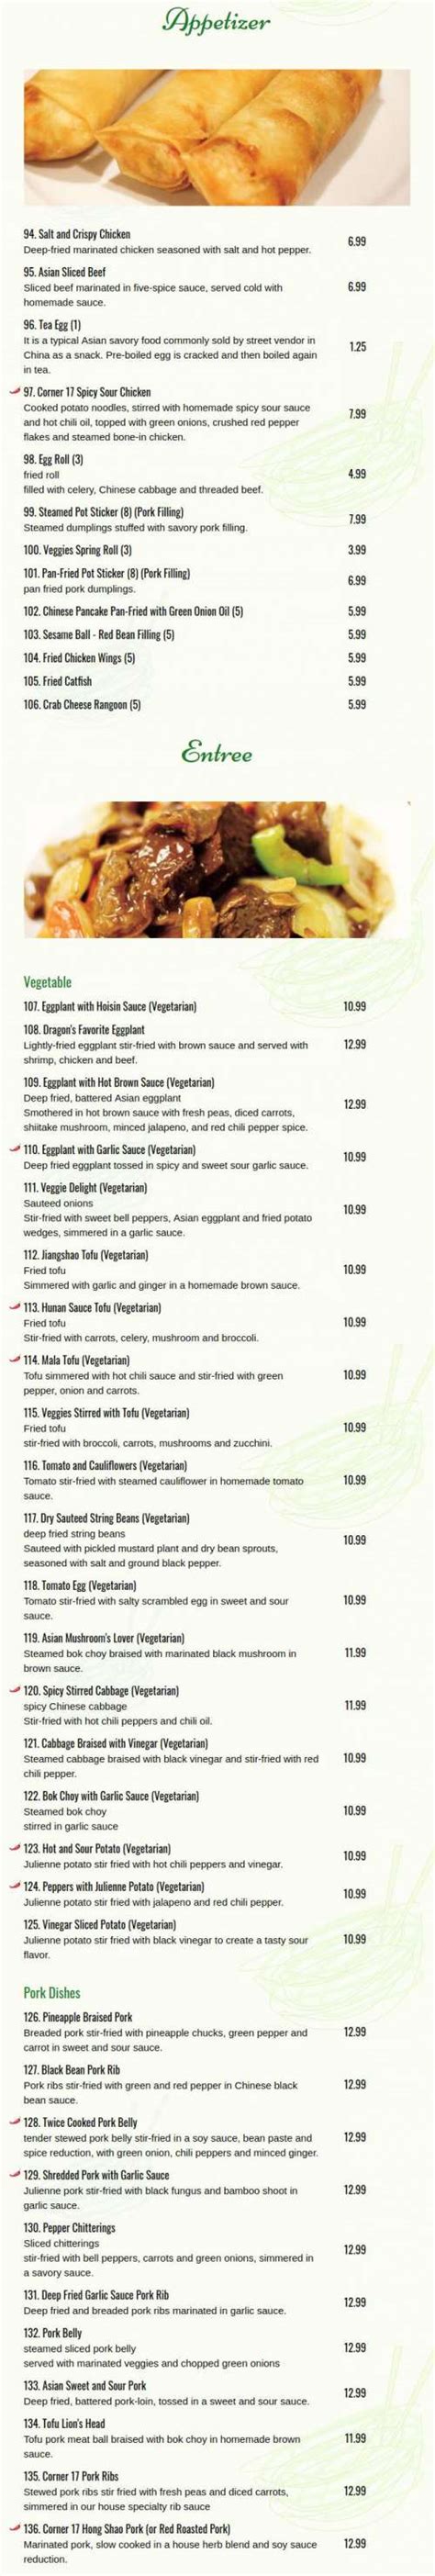 Corner 17 menu - Specialties: Both authentic and Americanized Chinese cuisines including handmade noodles/wontons/ boba teas. We are one of the most popular Asian restaurants in Saint Louis. Established in 2013. Corner 17 opened in 2013. 